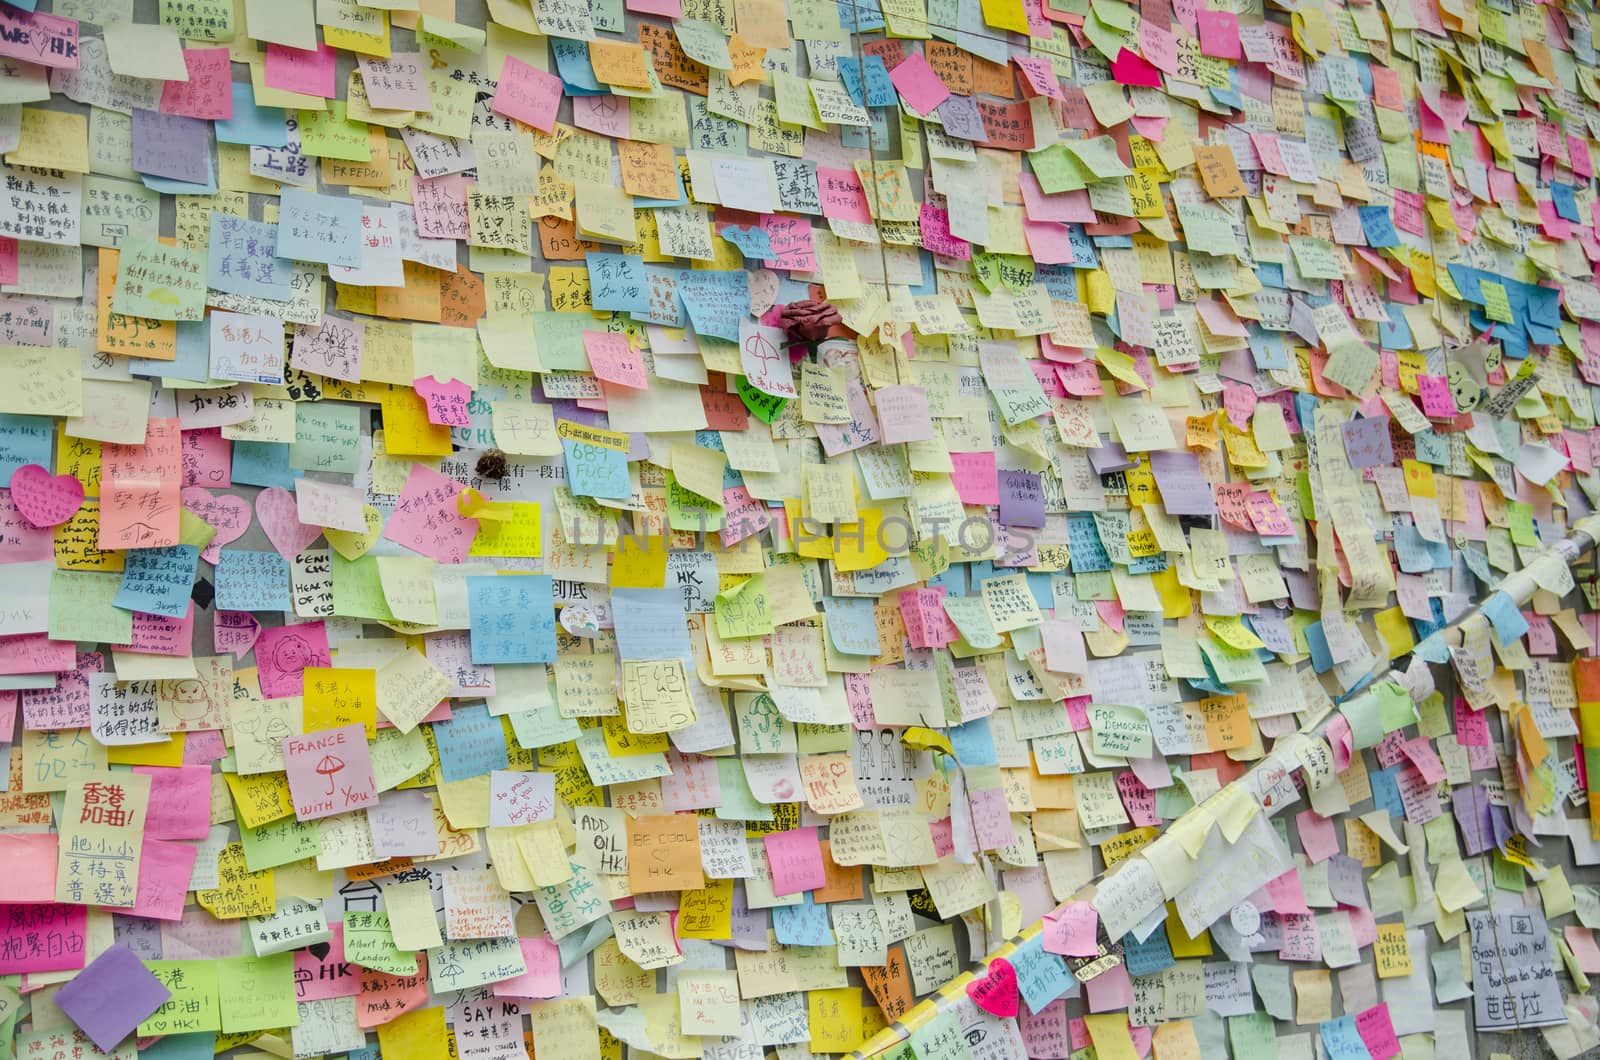 Colorful notes with suggestions on the wall